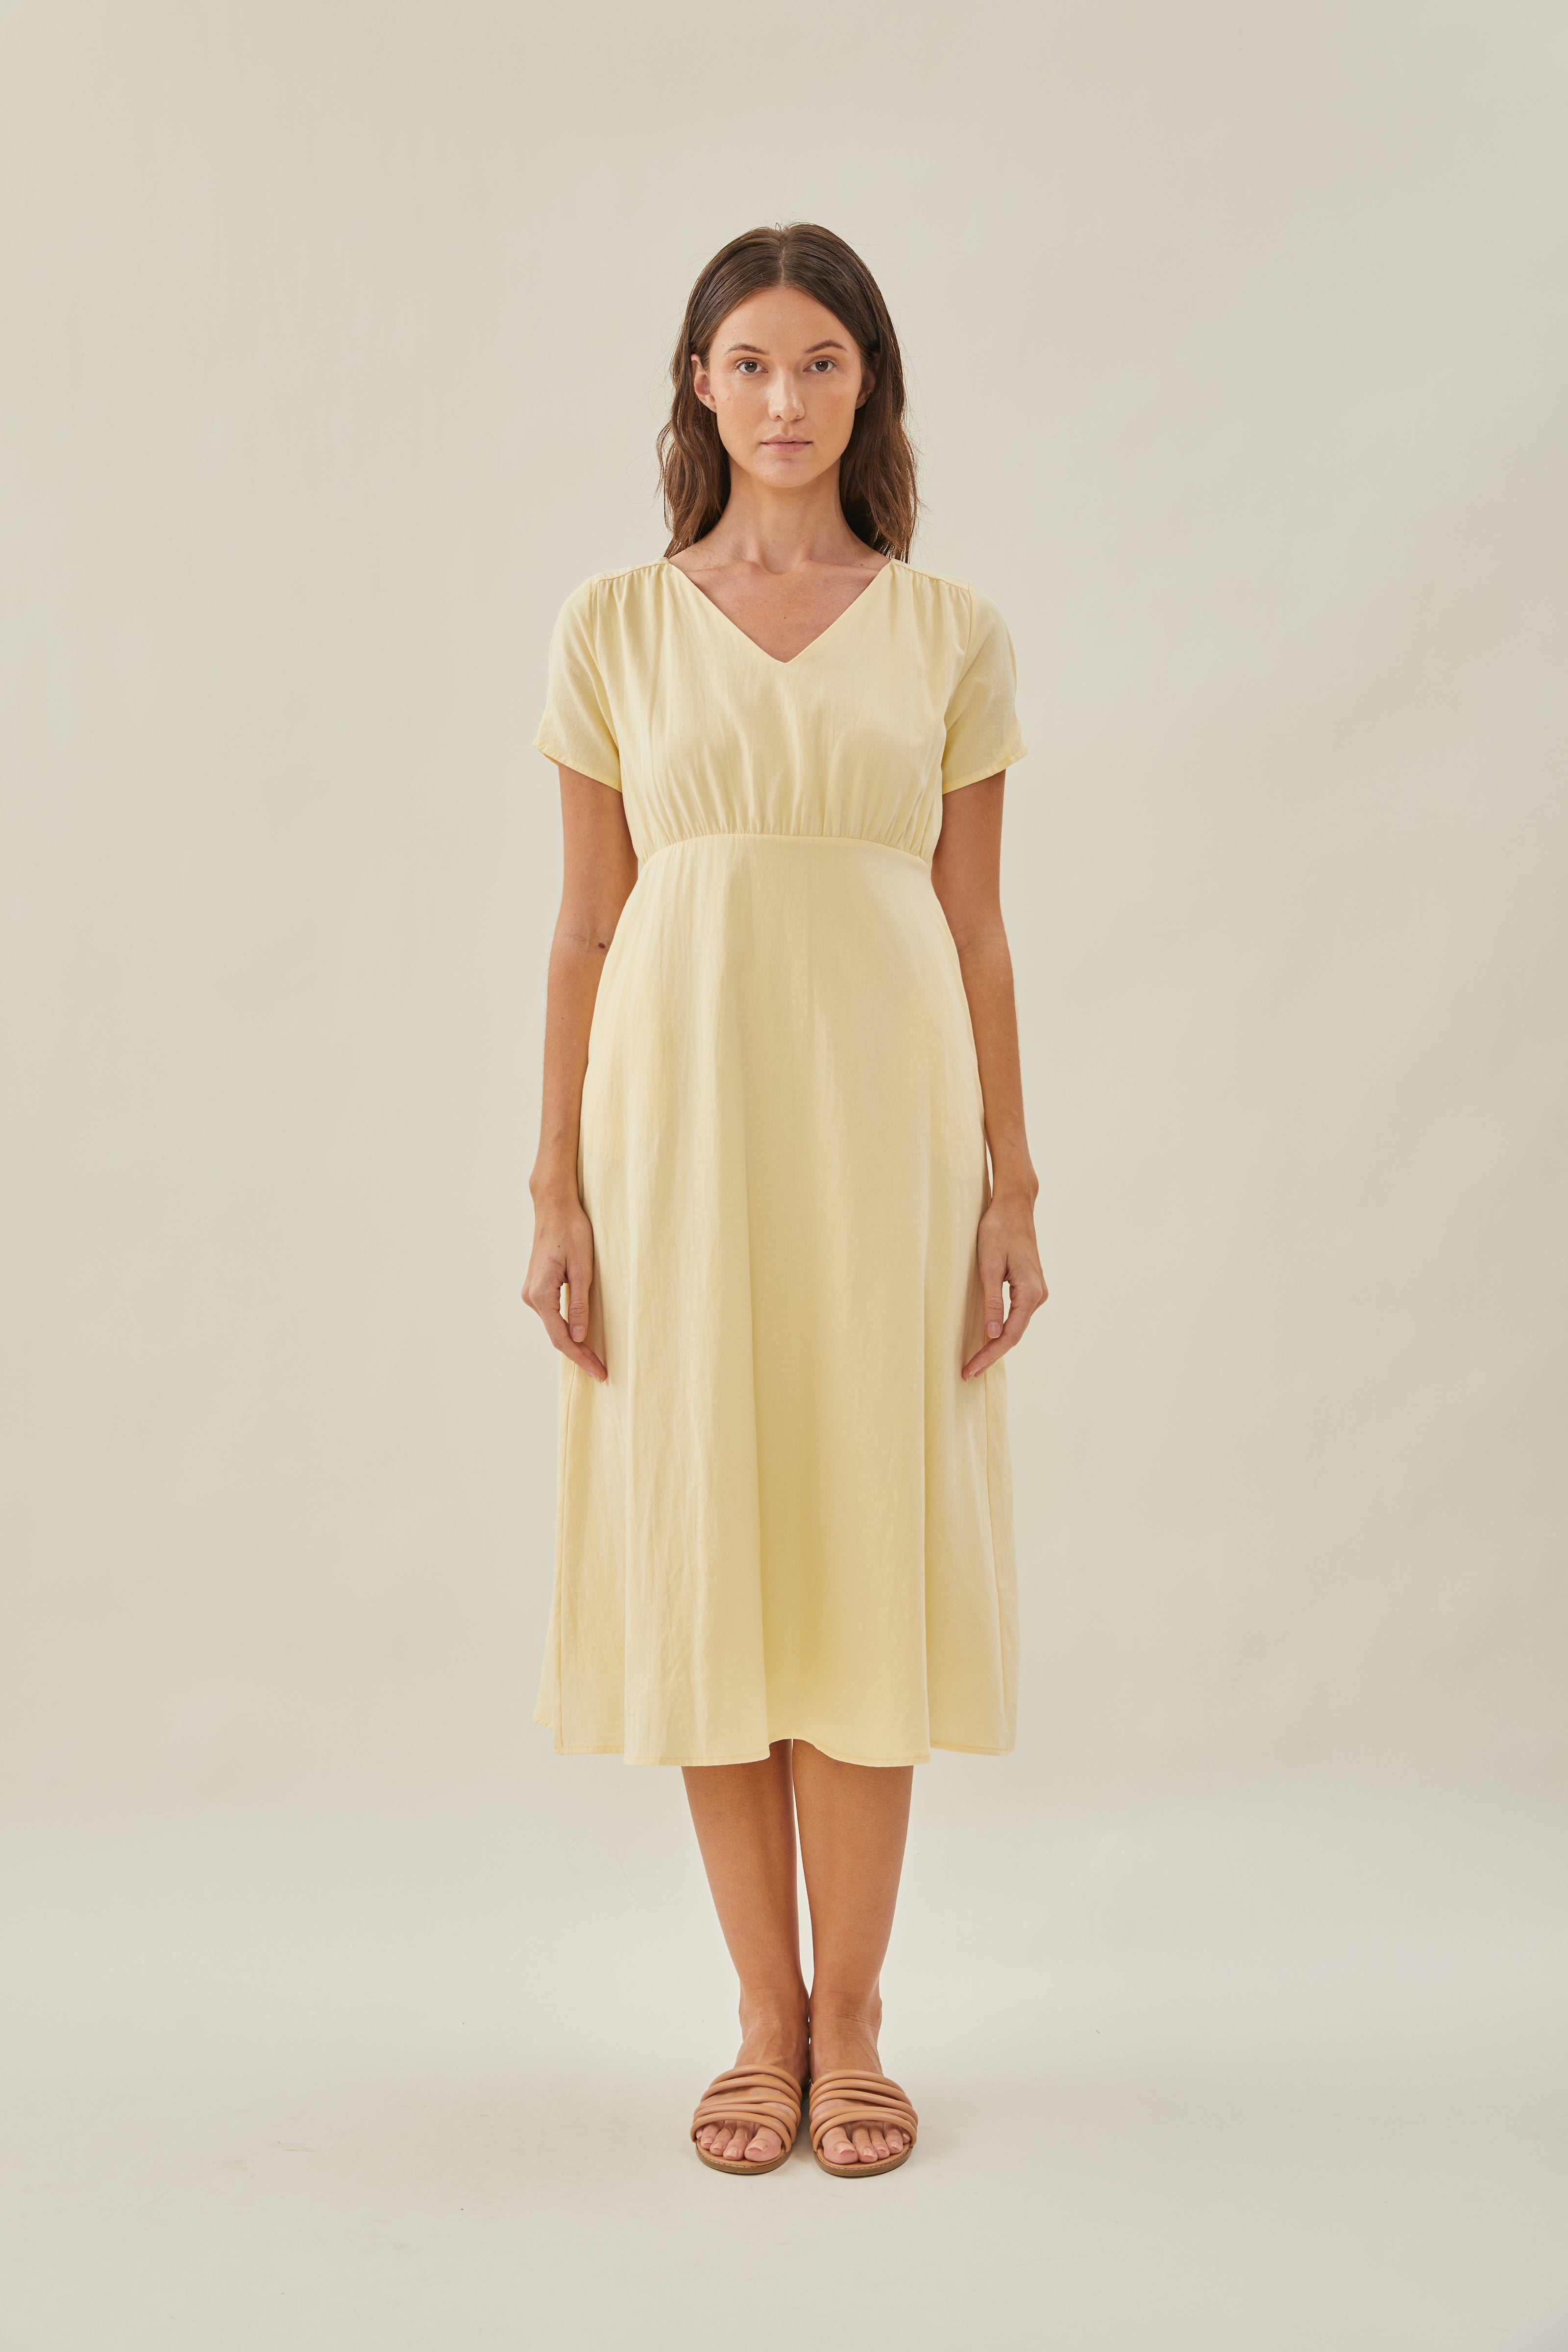 Waisted Midi Dress in Soft Yellow